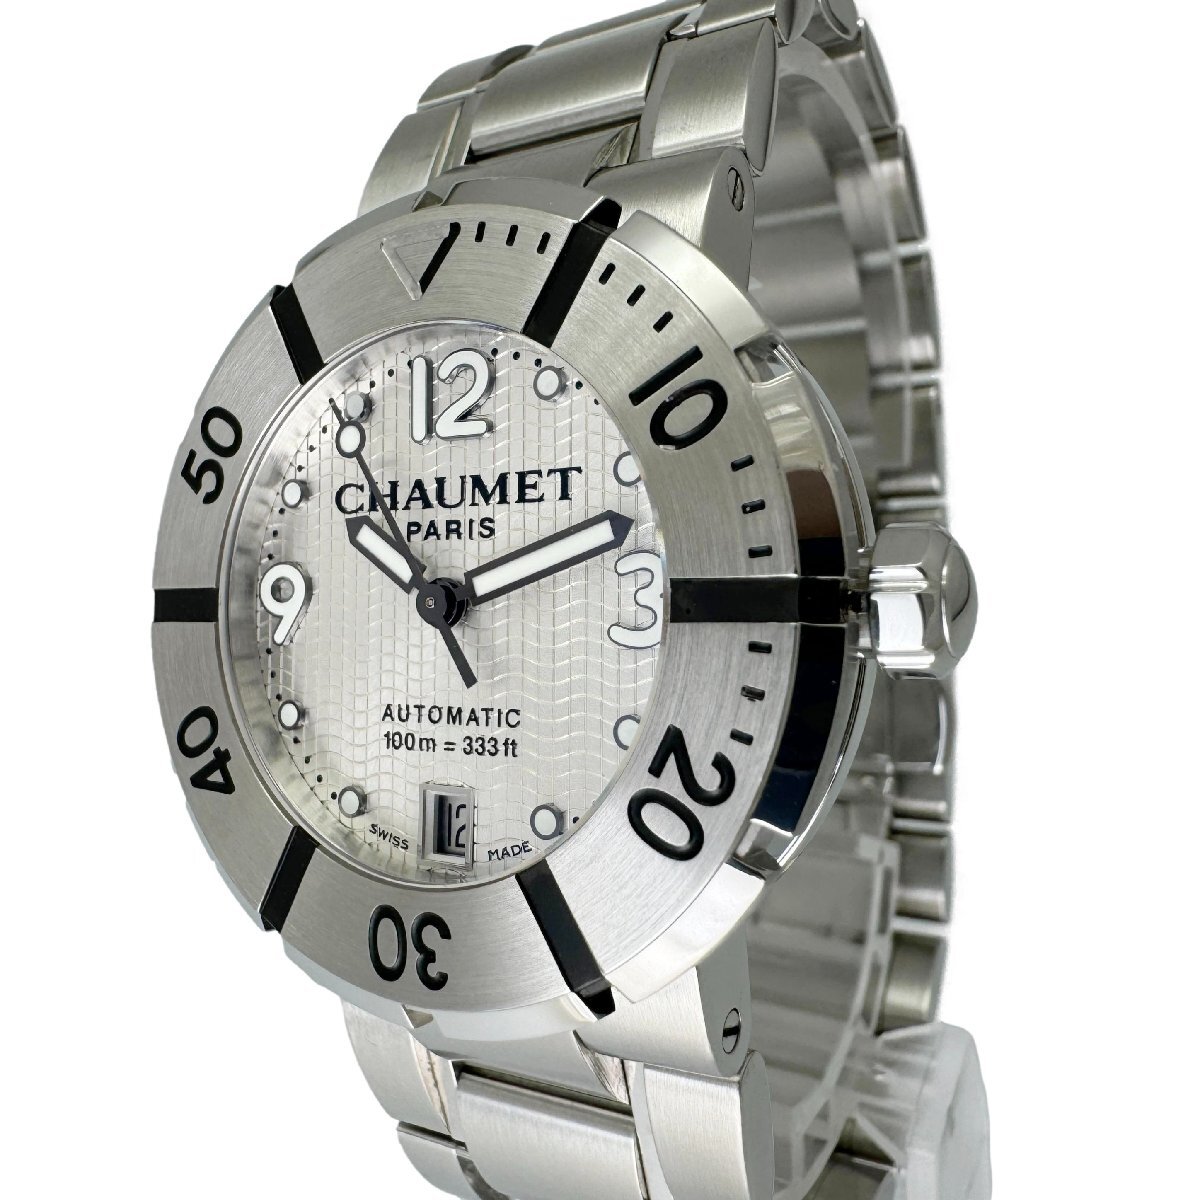 [ Chaumet CHAUMET* Class one ] diver used men's wristwatch self-winding watch silver face *A rank *